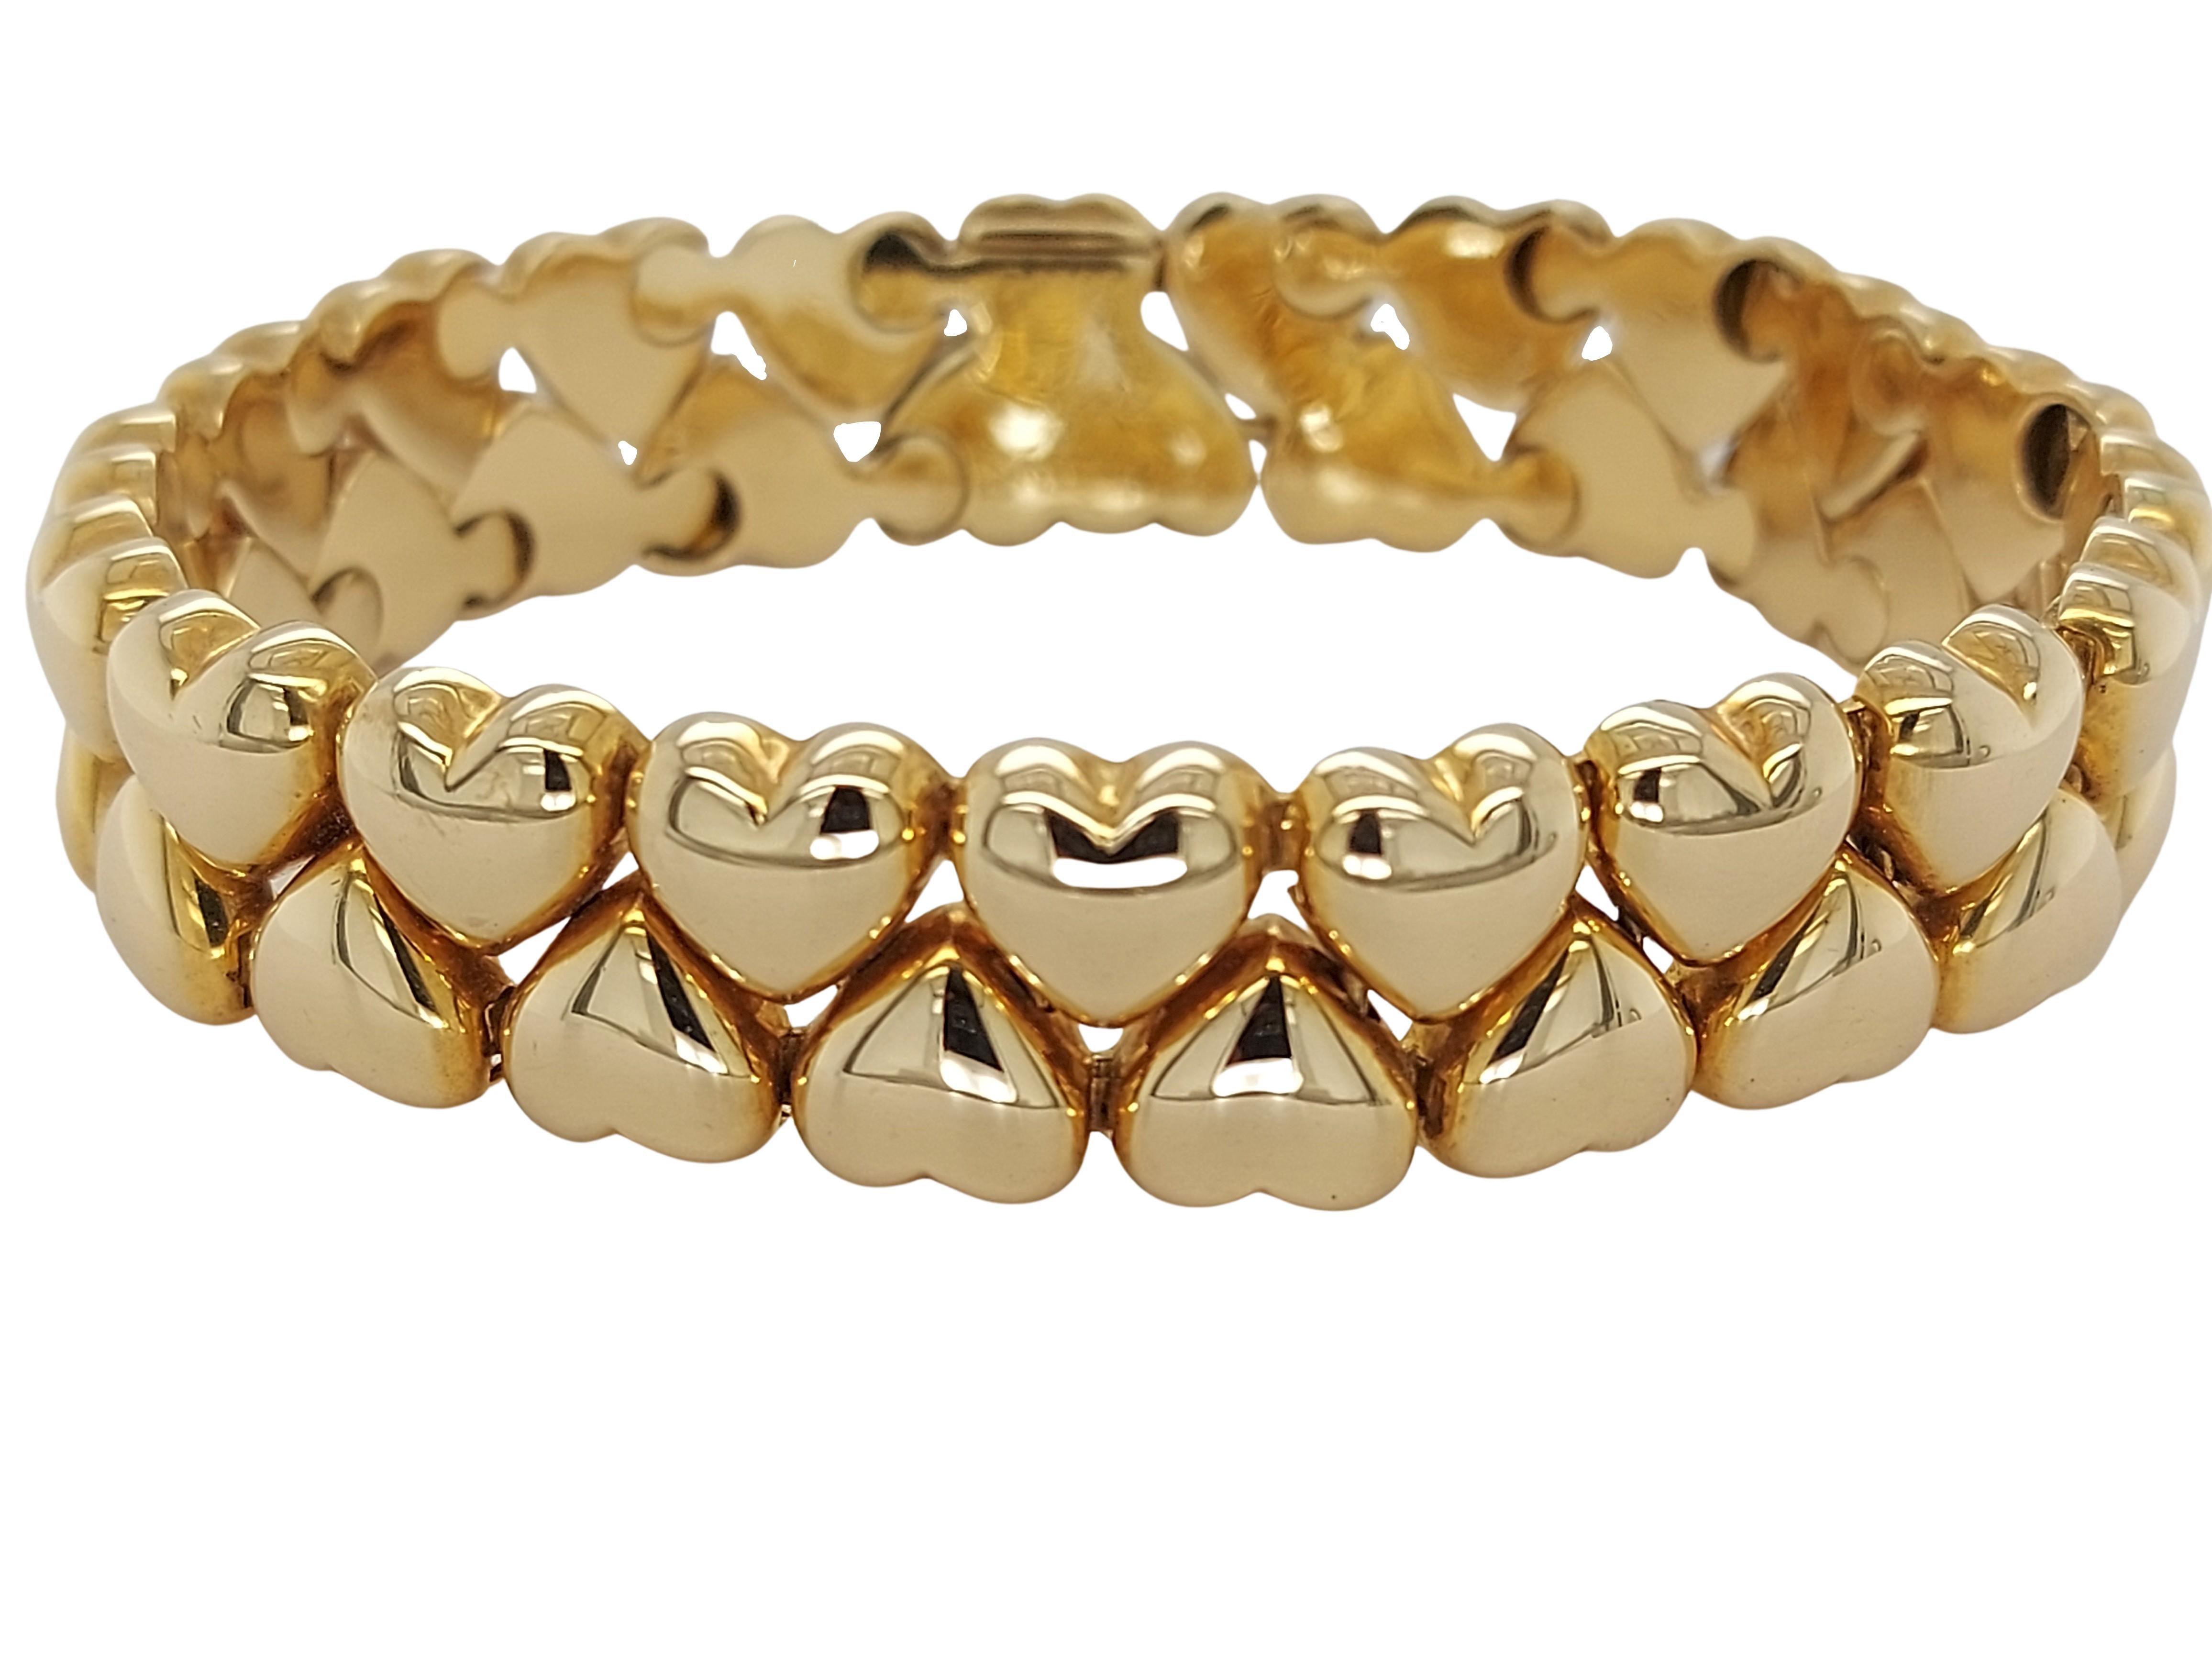 Cartier 18 kt Yellow gold two Row Heart Link Bracelet

Material: 18kt Yellow gold

Measurements: 17 cm x 12.3 mm. Will max fit a 17cm wrist

Total weight: 42.6 gram / 1.505 oz / 27.4 dwt

 Signed Cartier, Cartier 1994.